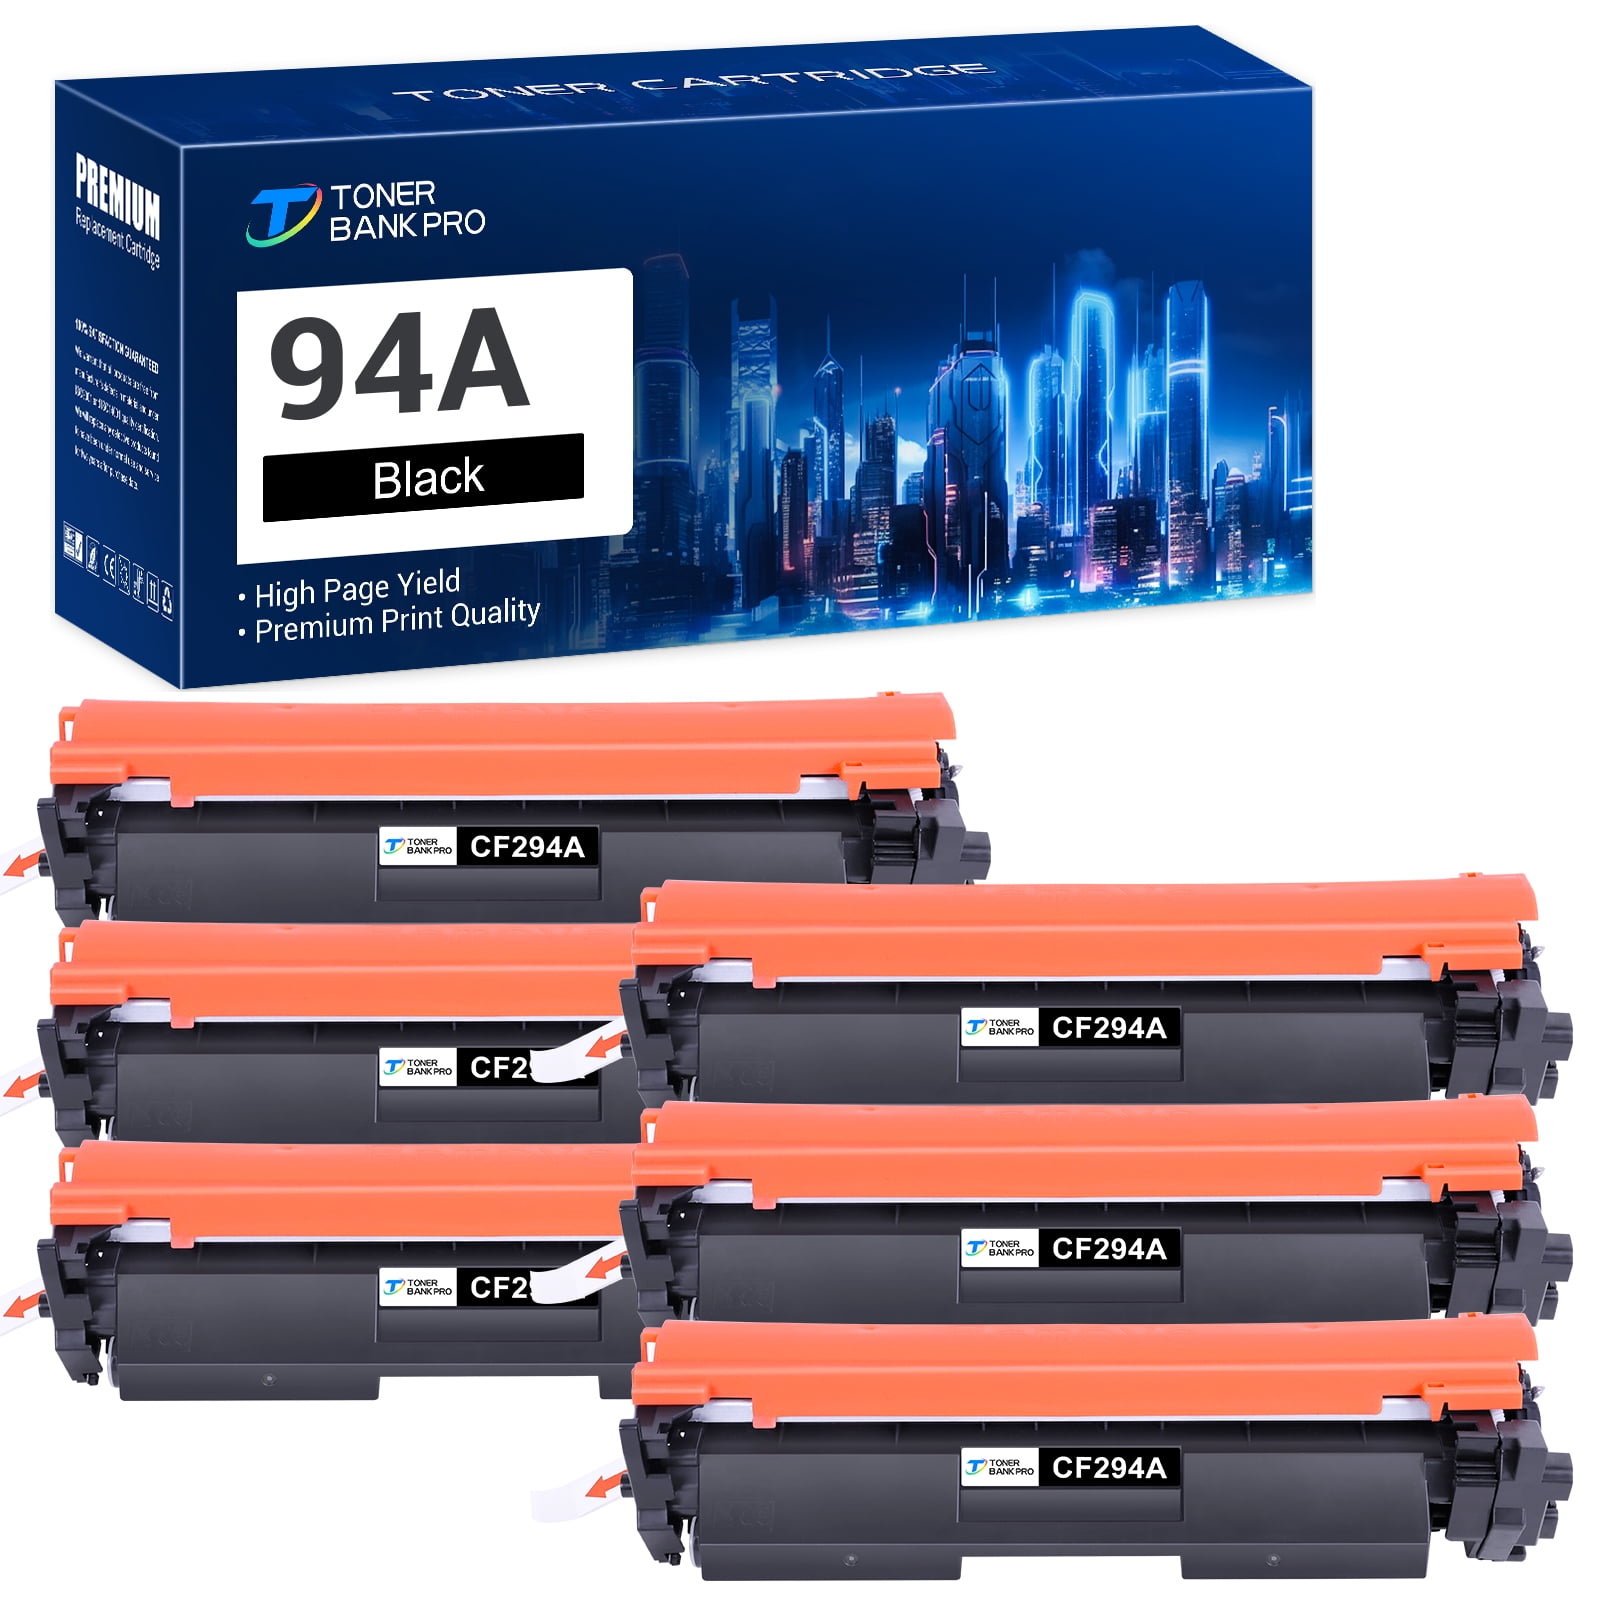 94A Toner Cartridge Replacement Compatible for HP CF294A CF294X LaserJet  Pro MFP M148dw M148fdw M149fdw LaserJet Pro M118dw Printer Replacement Ink ( Black,6-Pack) 